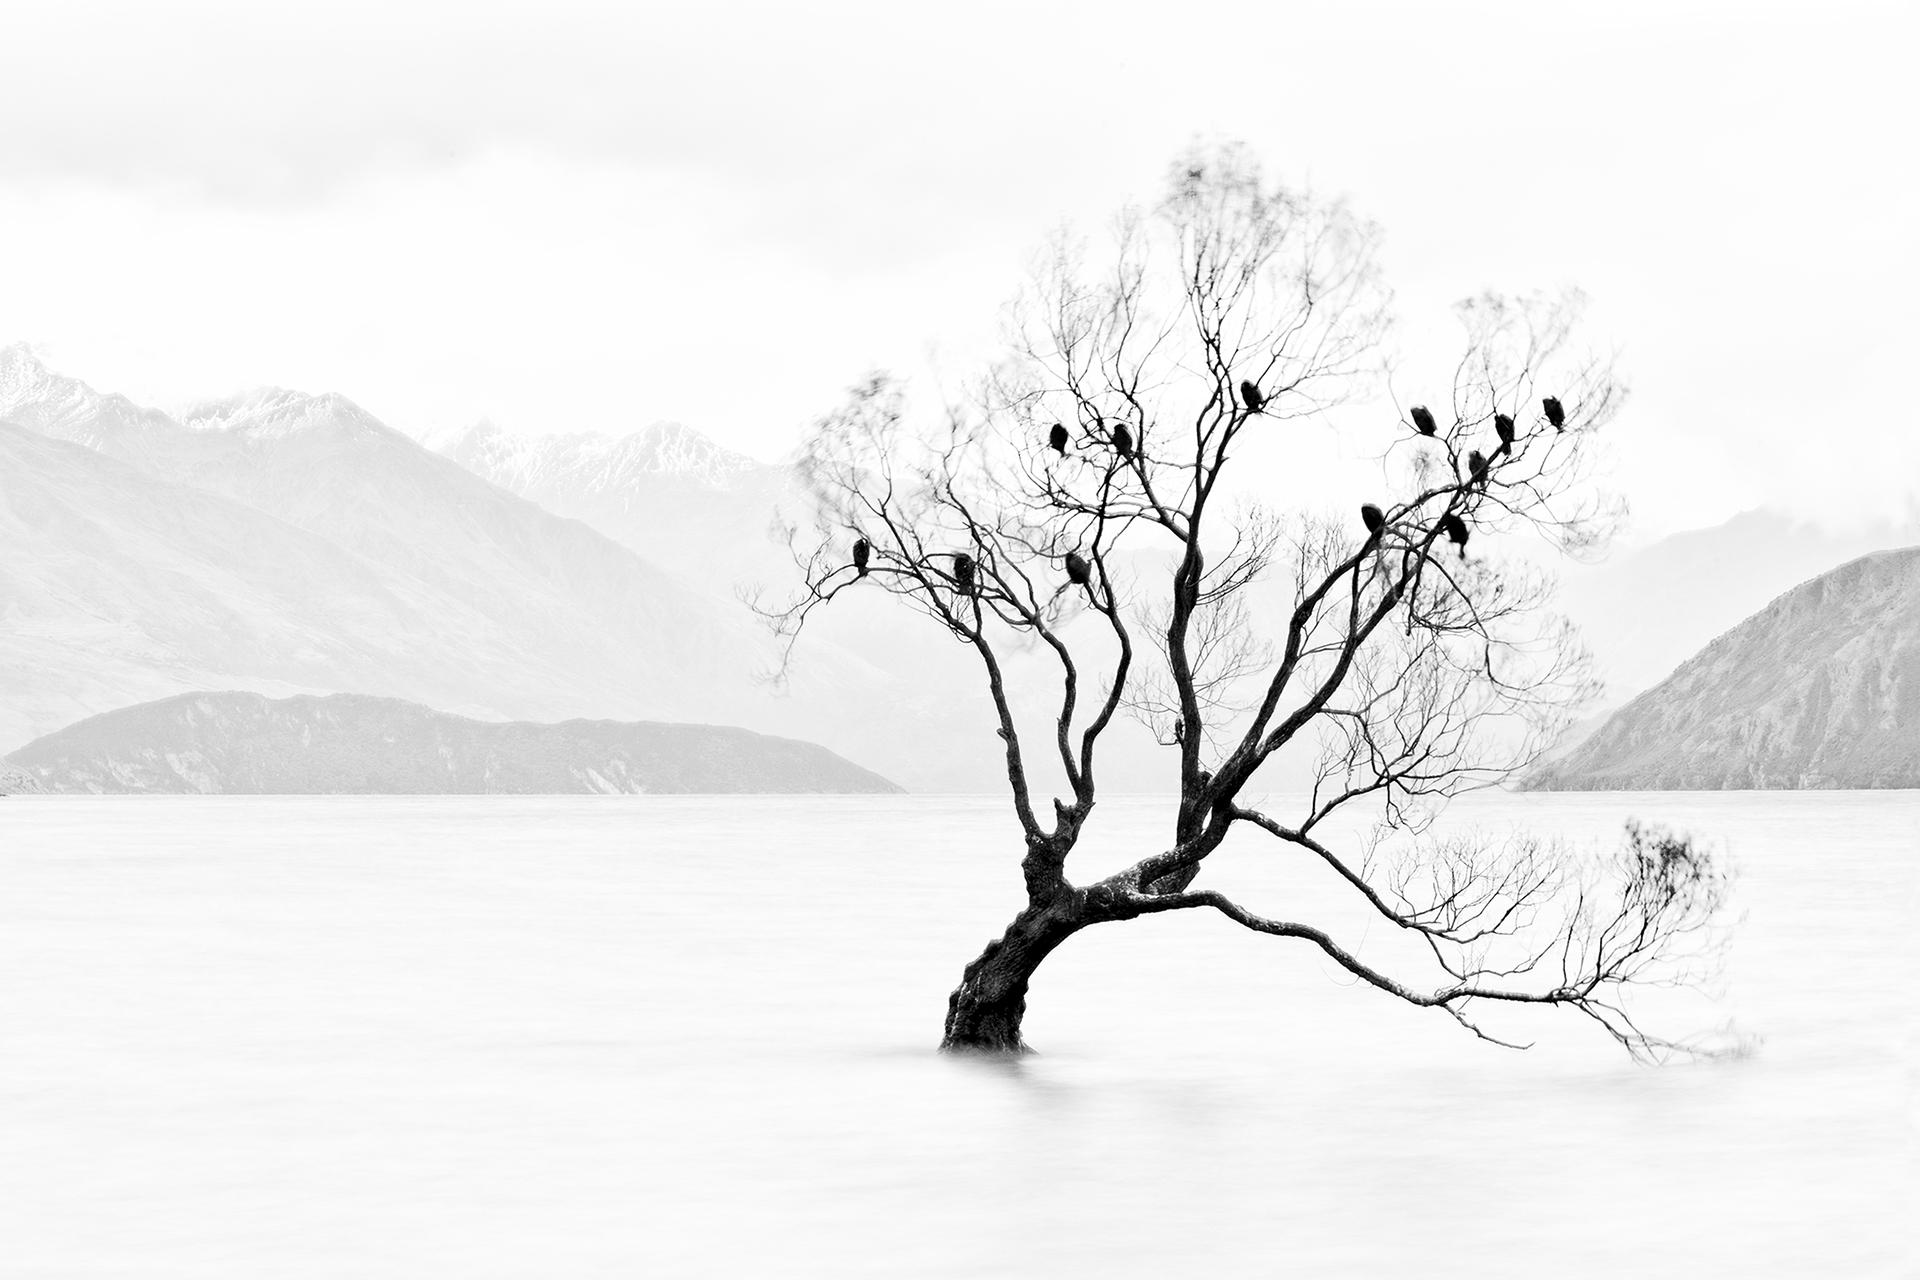 London Photography Awards Winner - Lone tree, not lonely